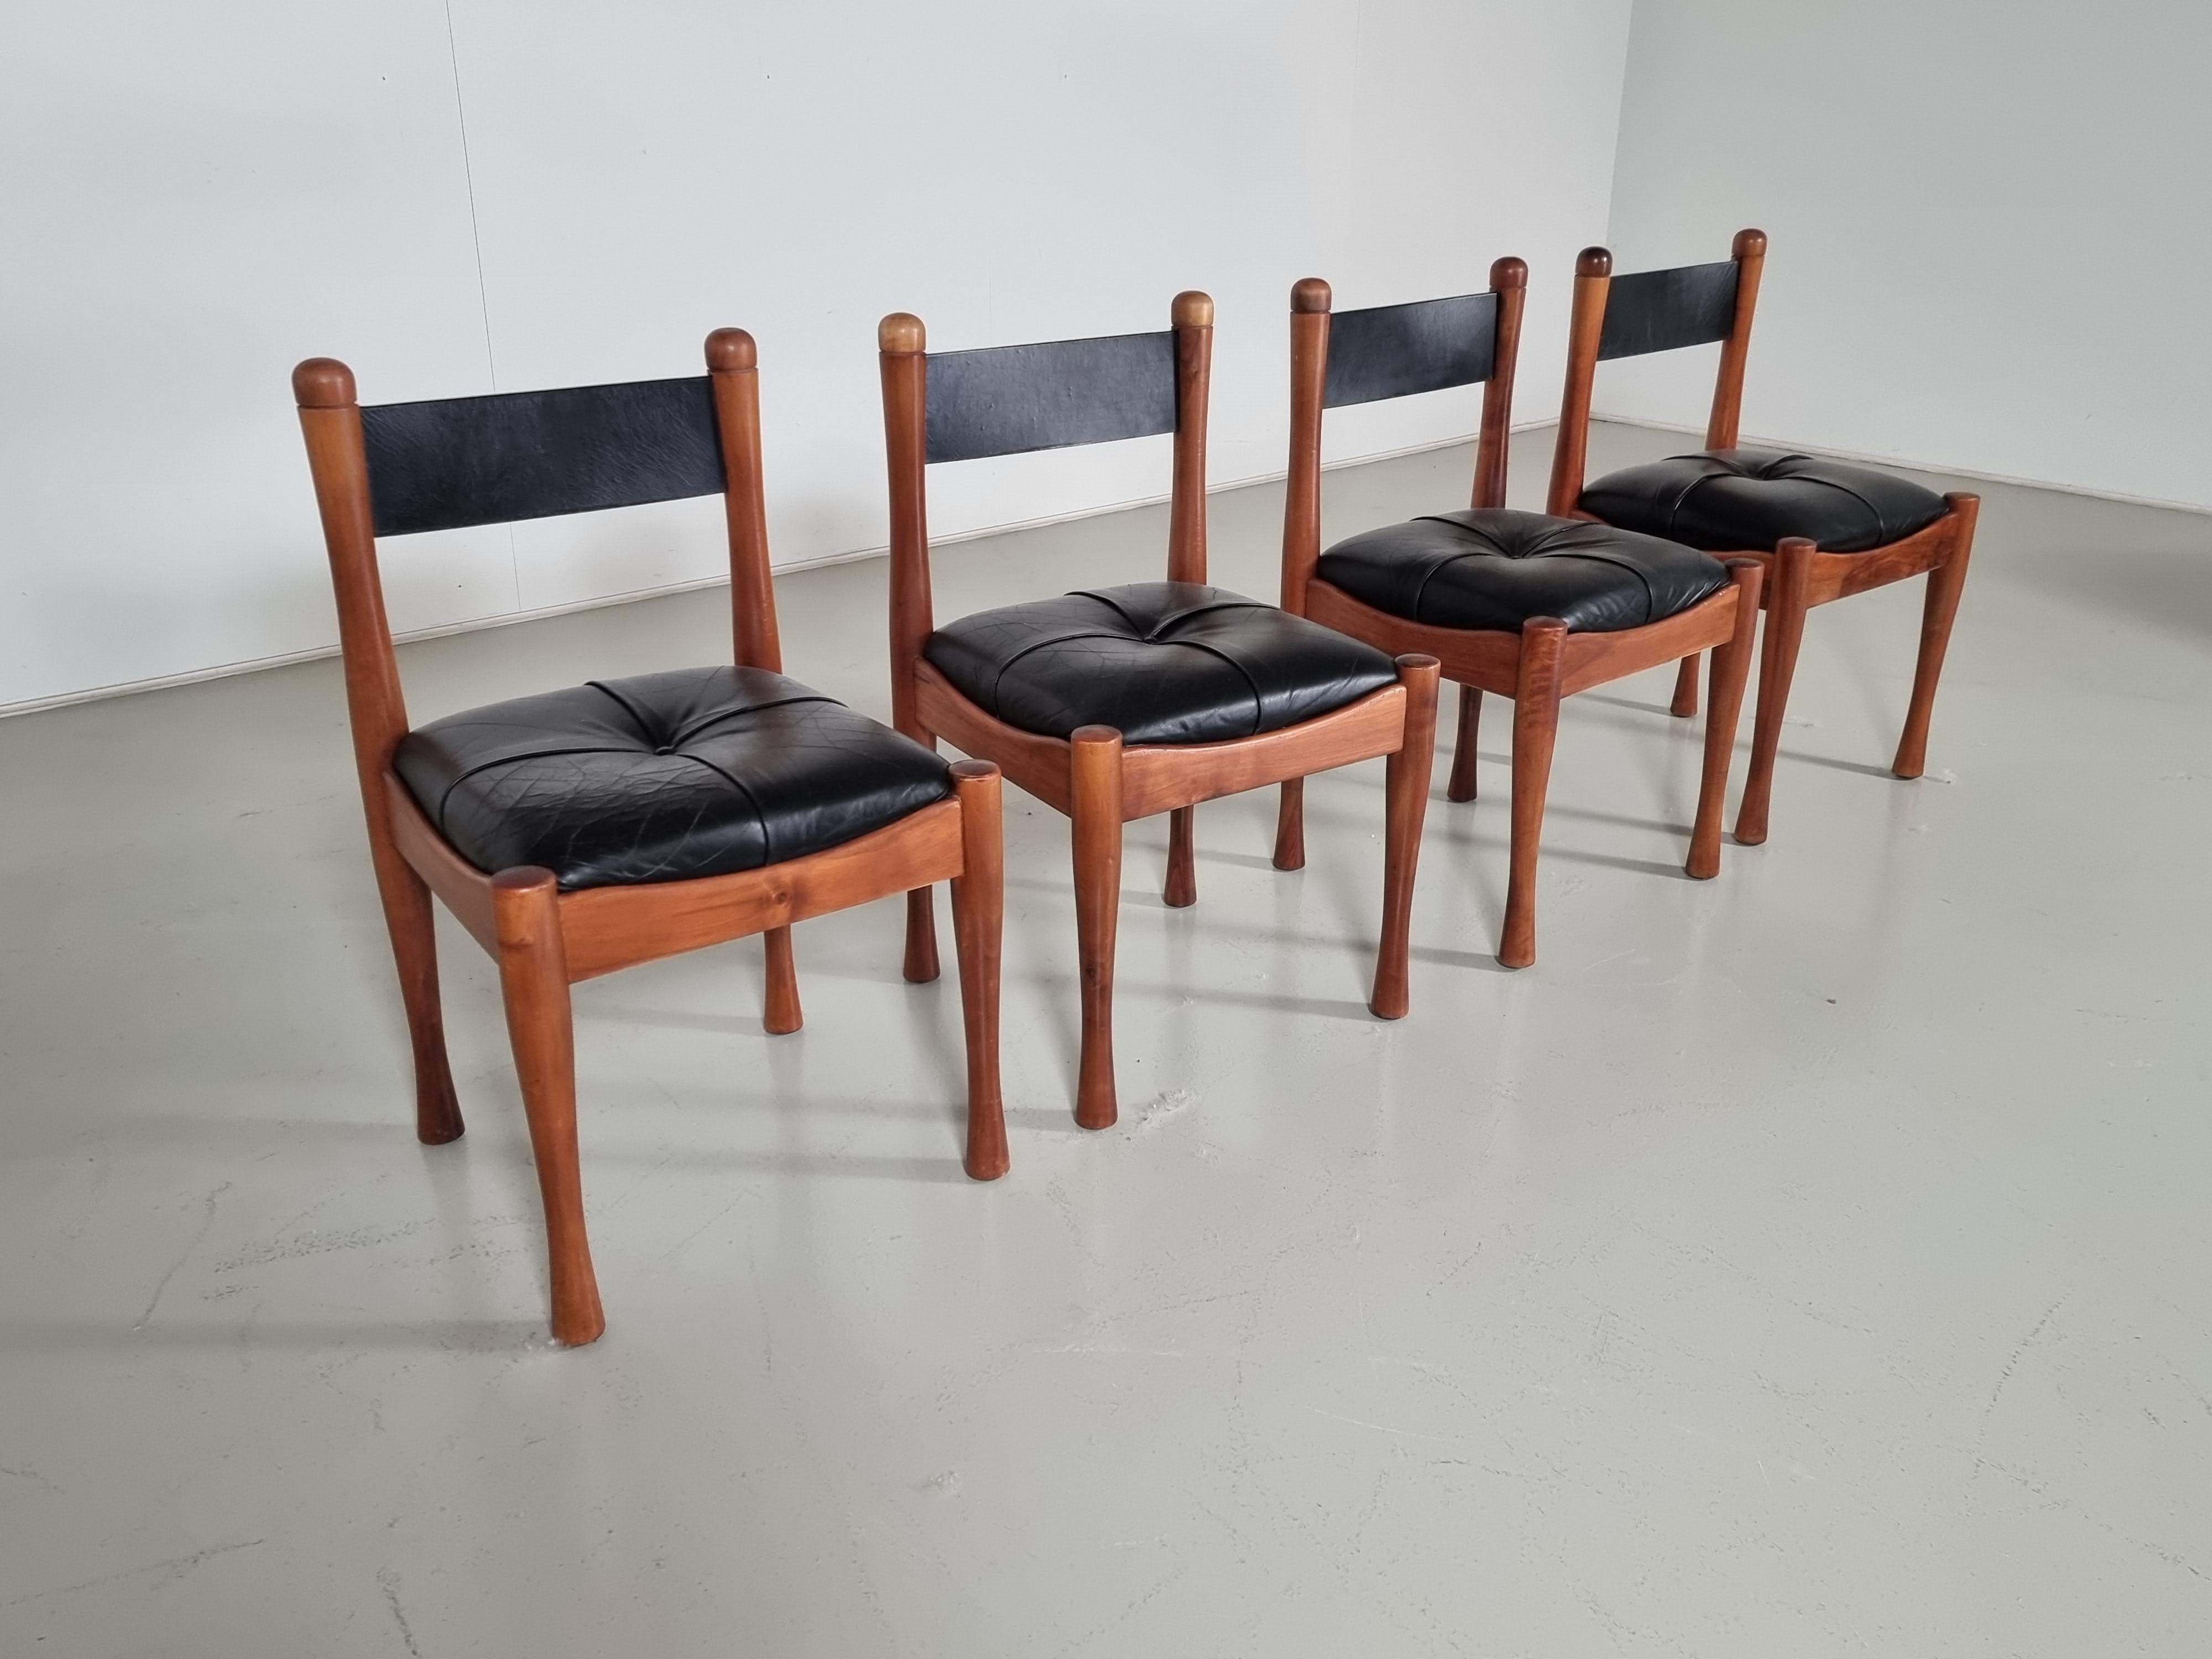 Silvio Coppola for Bernini, set of 6 dining chairs, stained wood, black leather, Italy, 1960s

This set of chairs was designed by Silvio Coppola for Bernini in the 1960s. These chairs feature a characteristic darkened frame and upholstered black